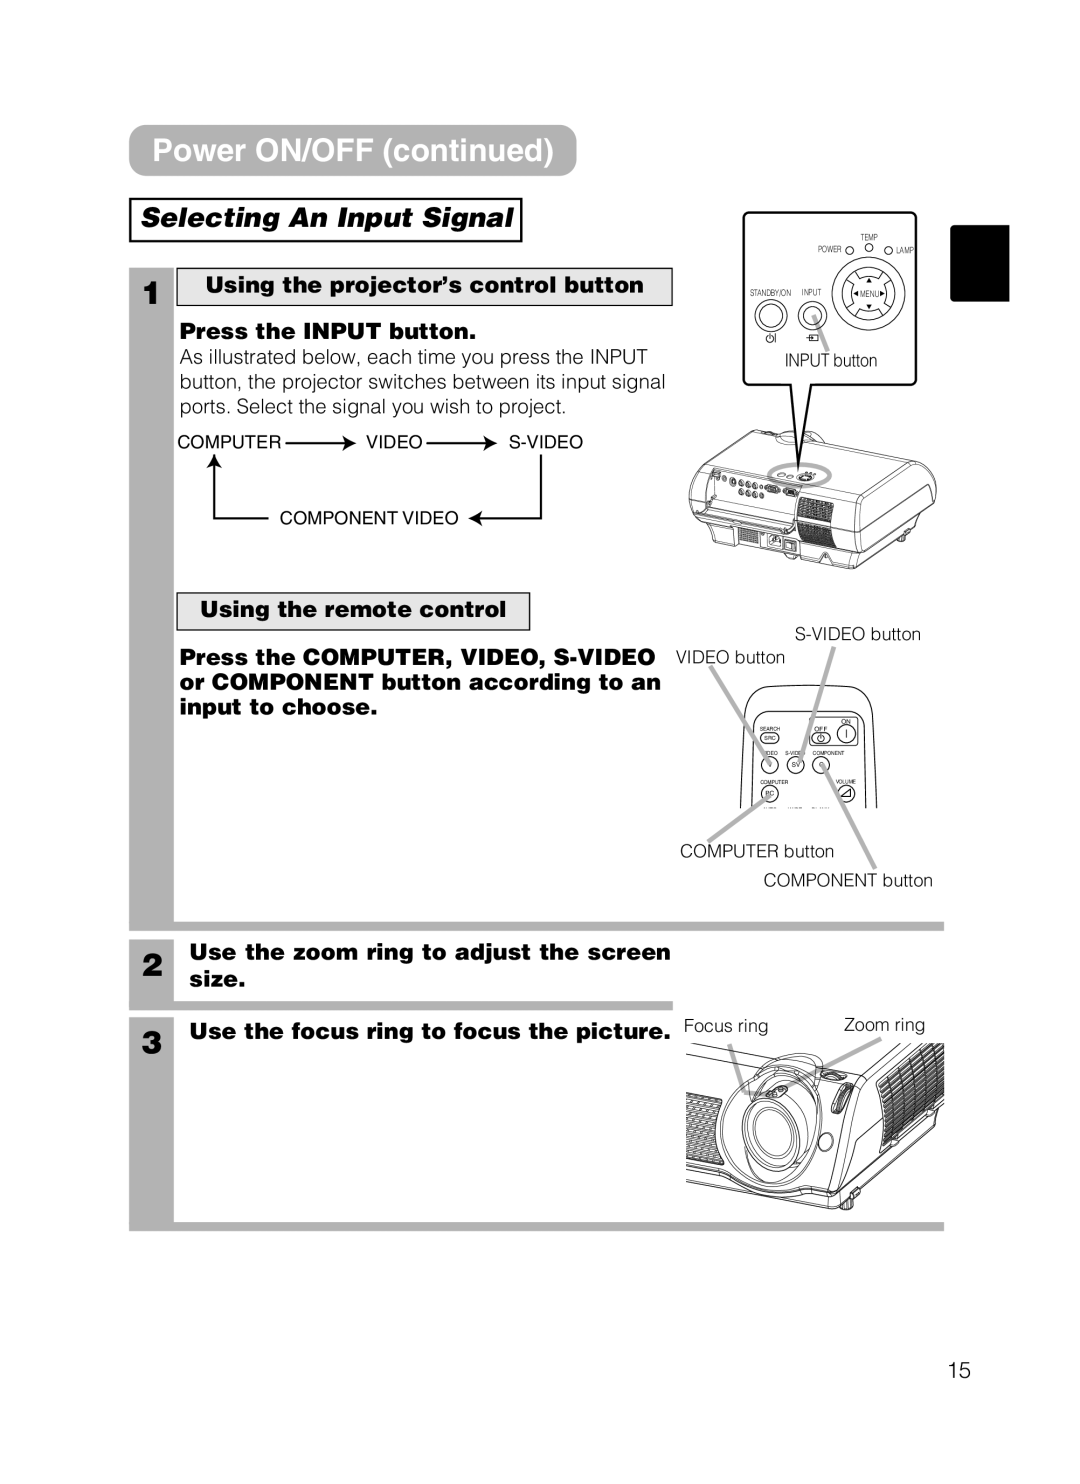 Hitachi HOME-1 Power ON/OFF continued, Selecting An Input Signal, Using the projector’s control button, input to choose 